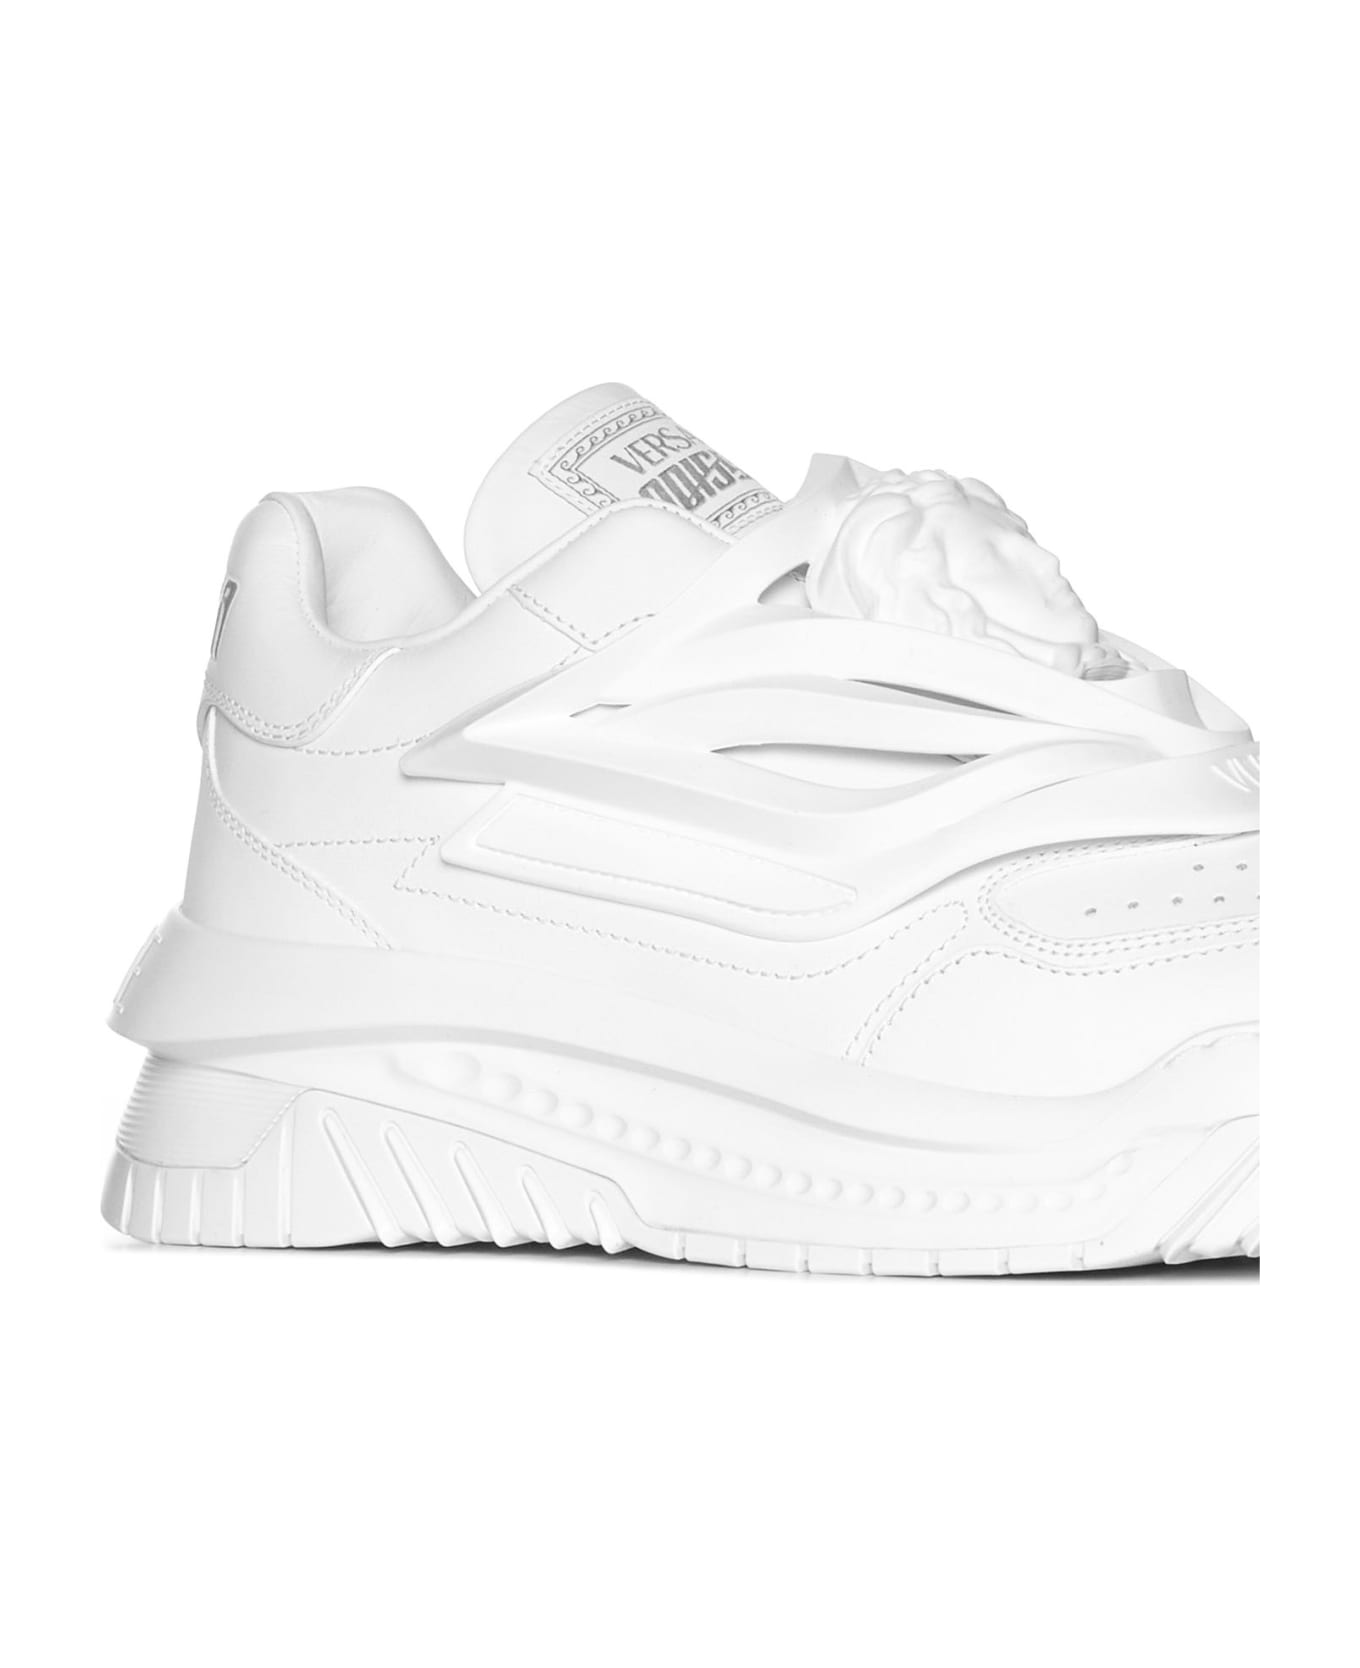 Versace White 'odissea' Sneakers - Bianco スニーカー